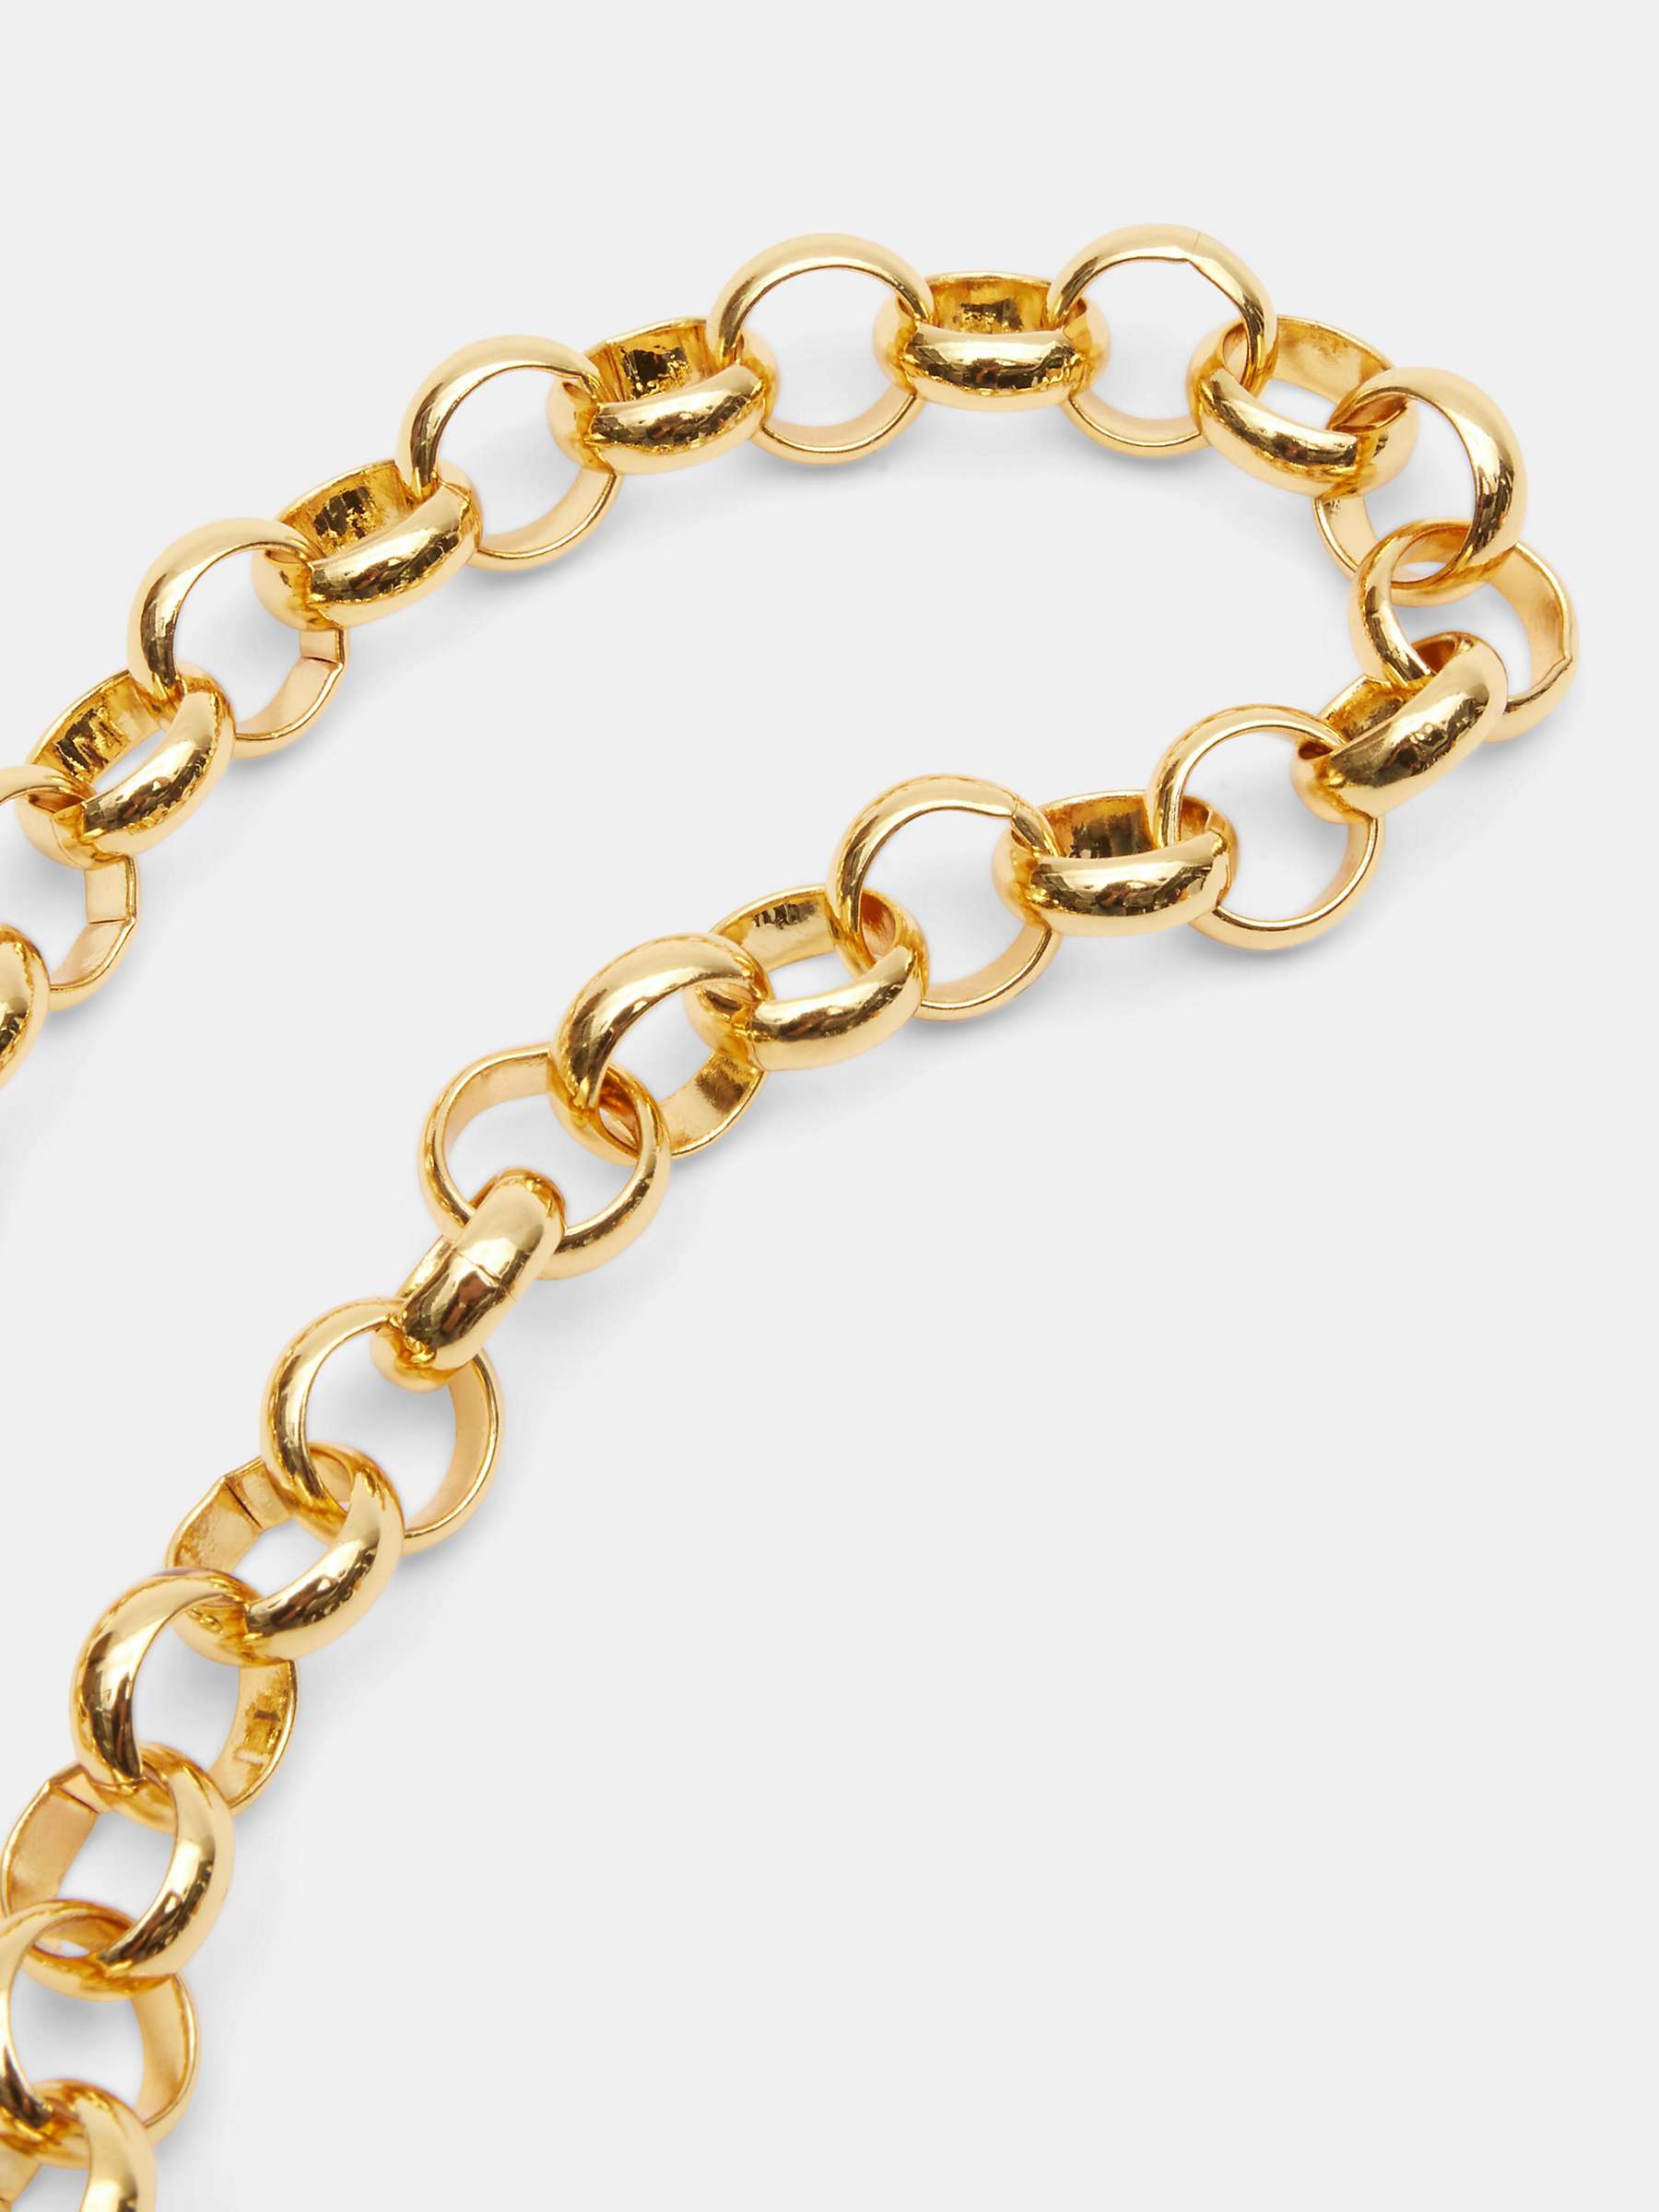 Buy HUSH Harper Chunky Chain Necklace, Gold Online at johnlewis.com